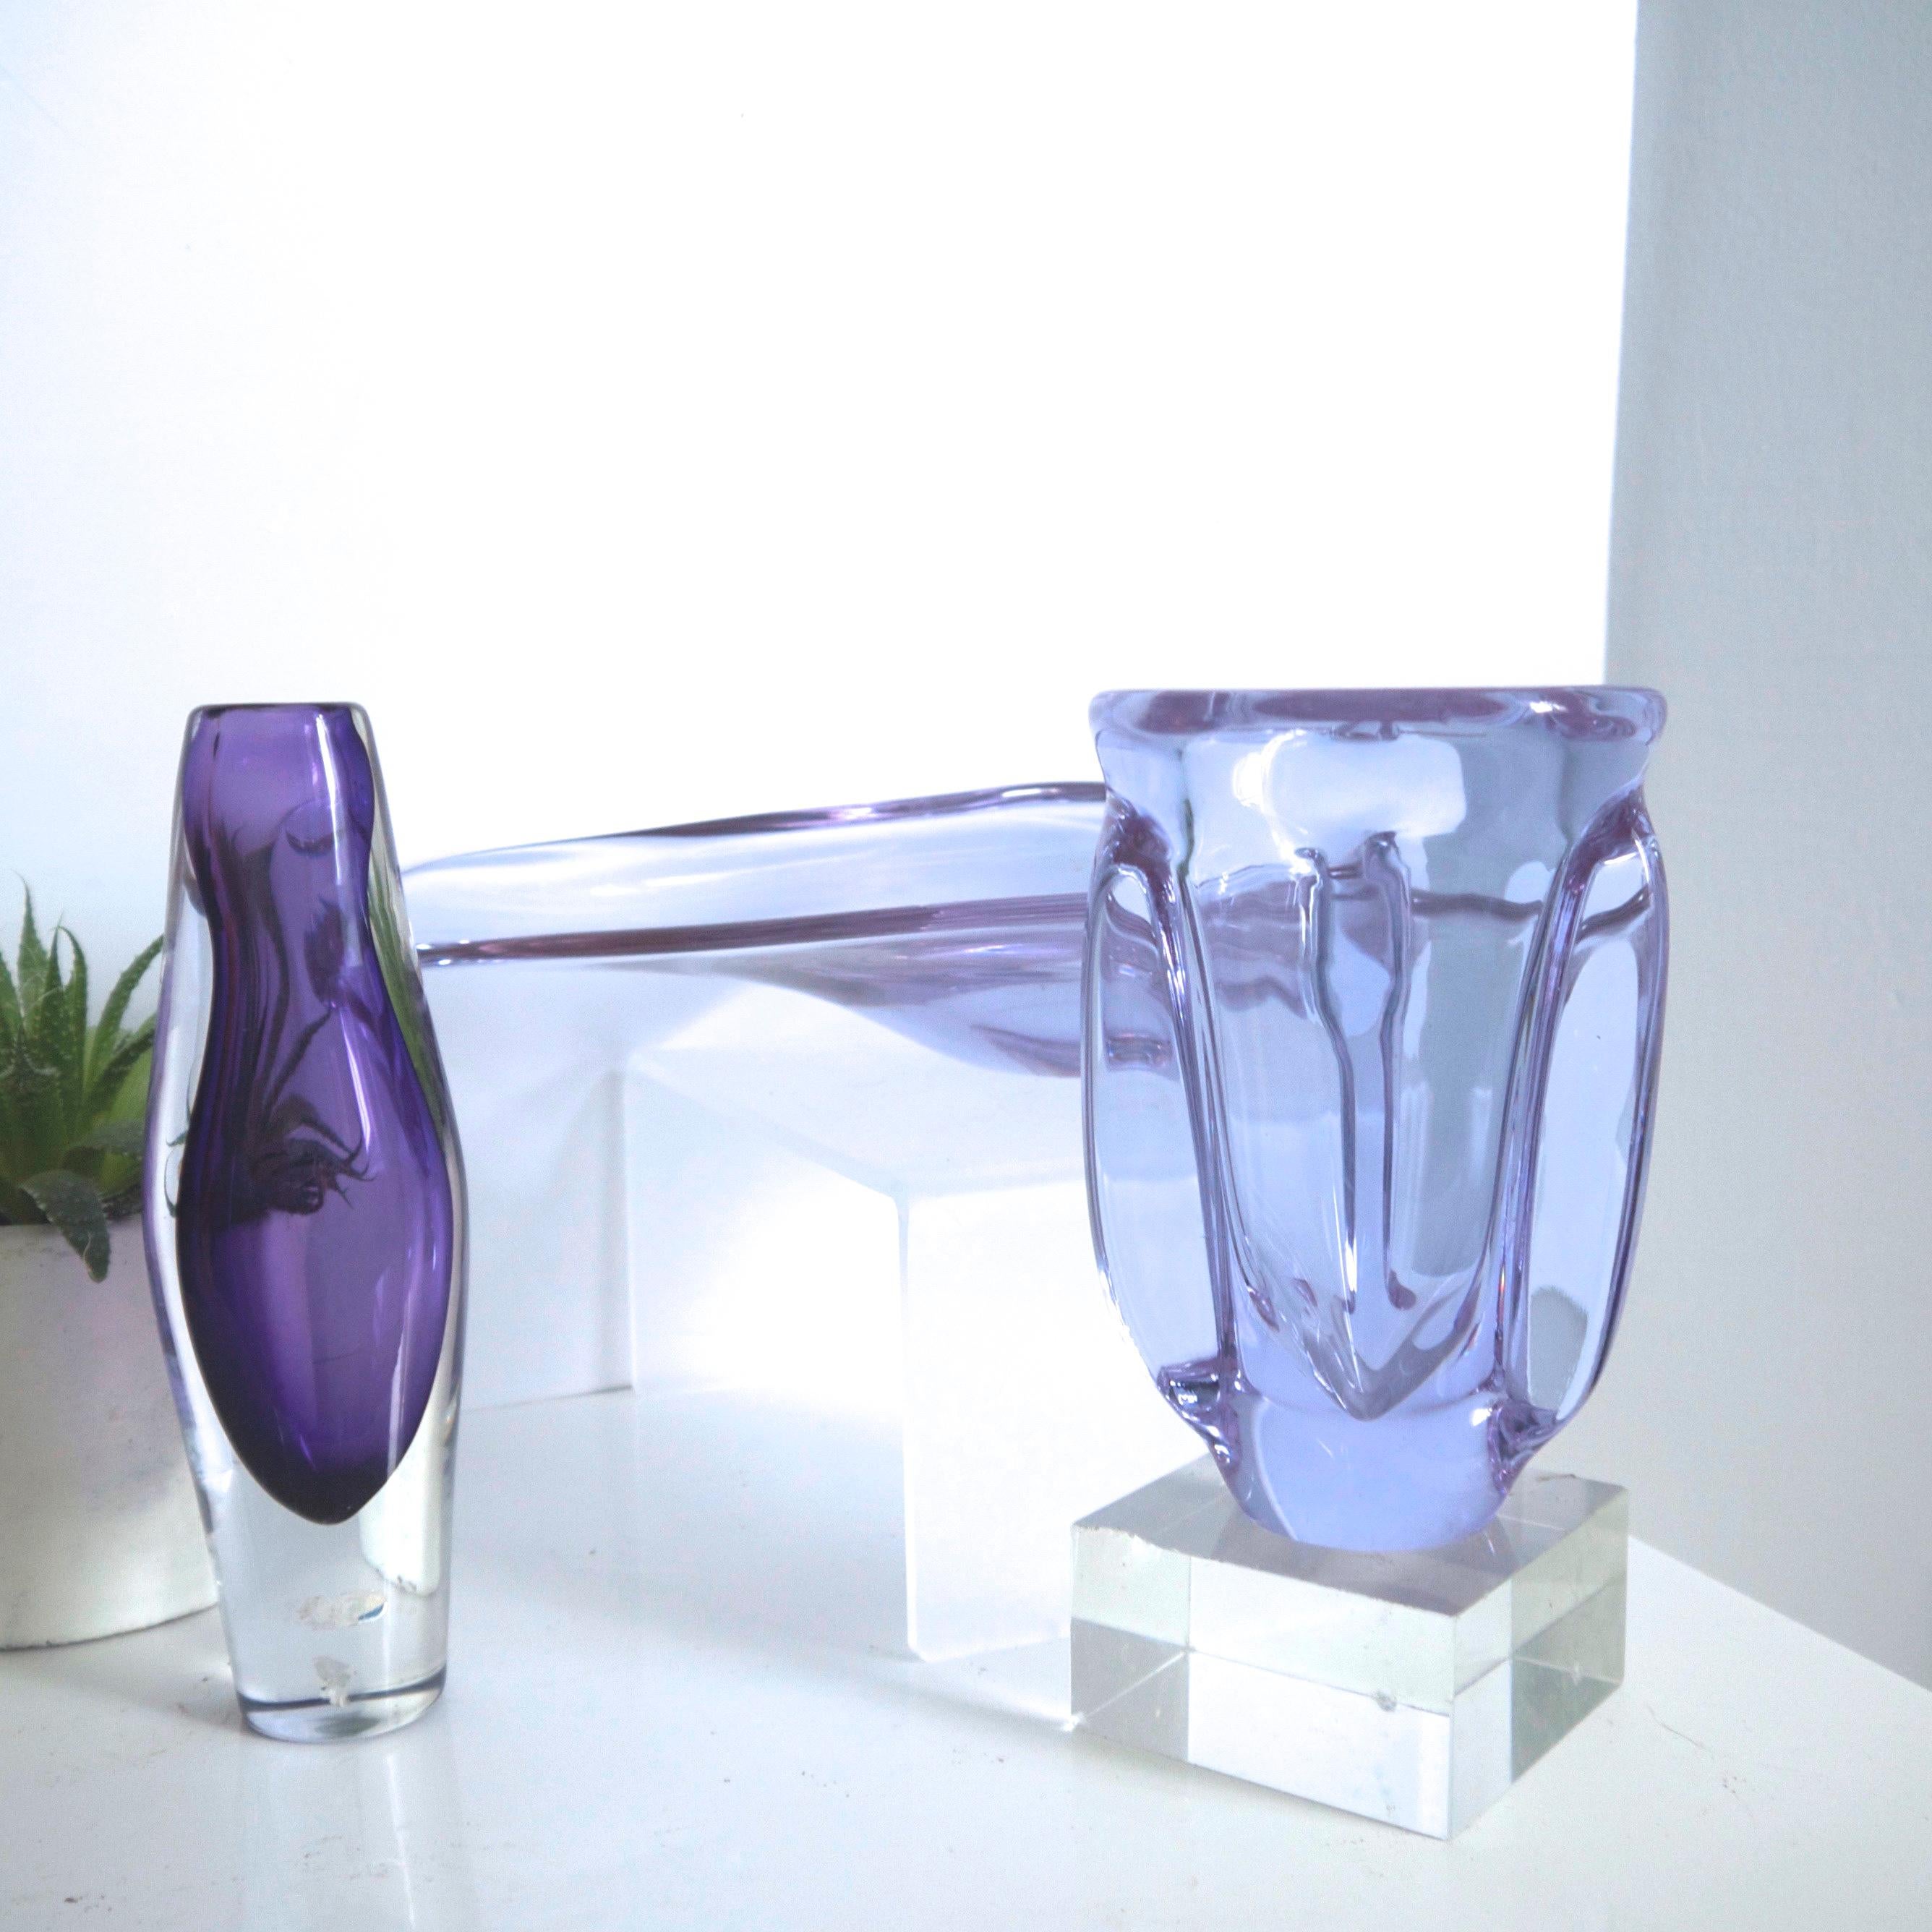 Mid-20th Century Sèvres Crystal Vase and Organic-form Dish in Neodymium Alexandrite Glass For Sale